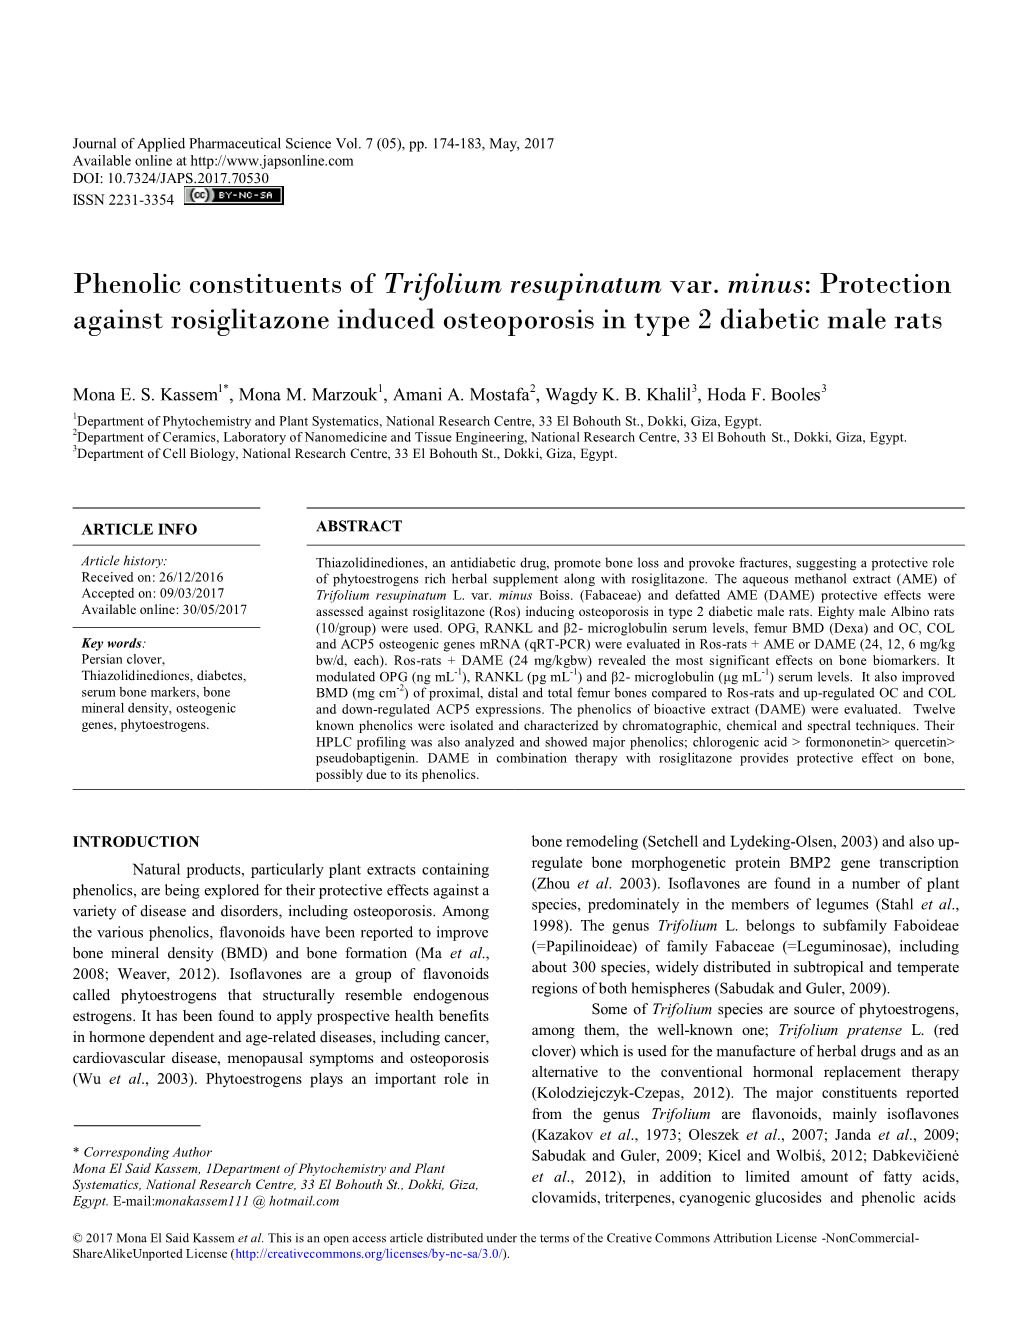 Phenolic Constituents of Trifolium Resupinatum Var. Minus: Protection Against Rosiglitazone Induced Osteoporosis in Type 2 Diabetic Male Rats